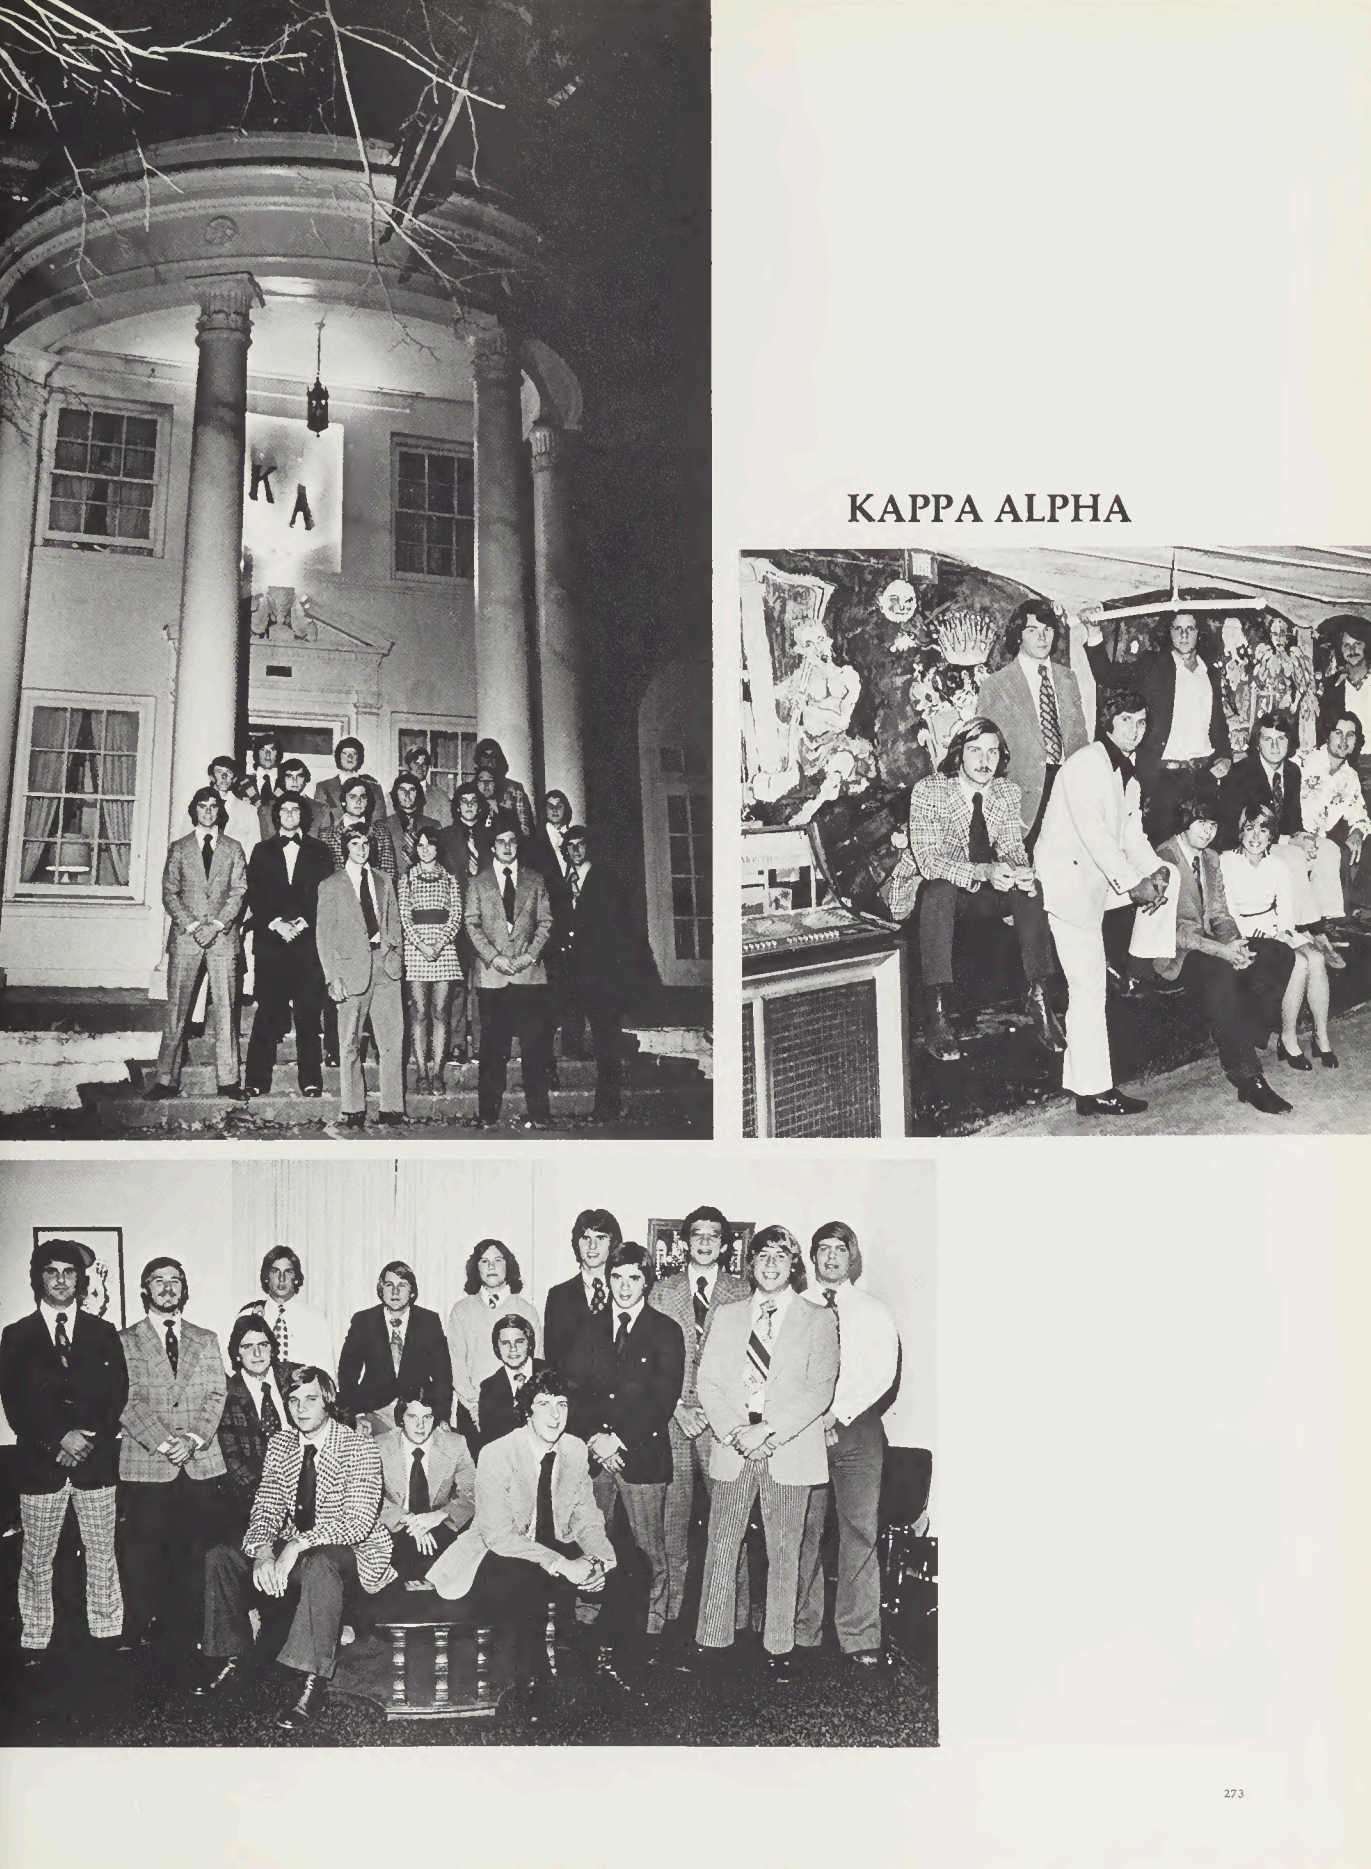 Throwback to Kappa Alpha Order in 1974